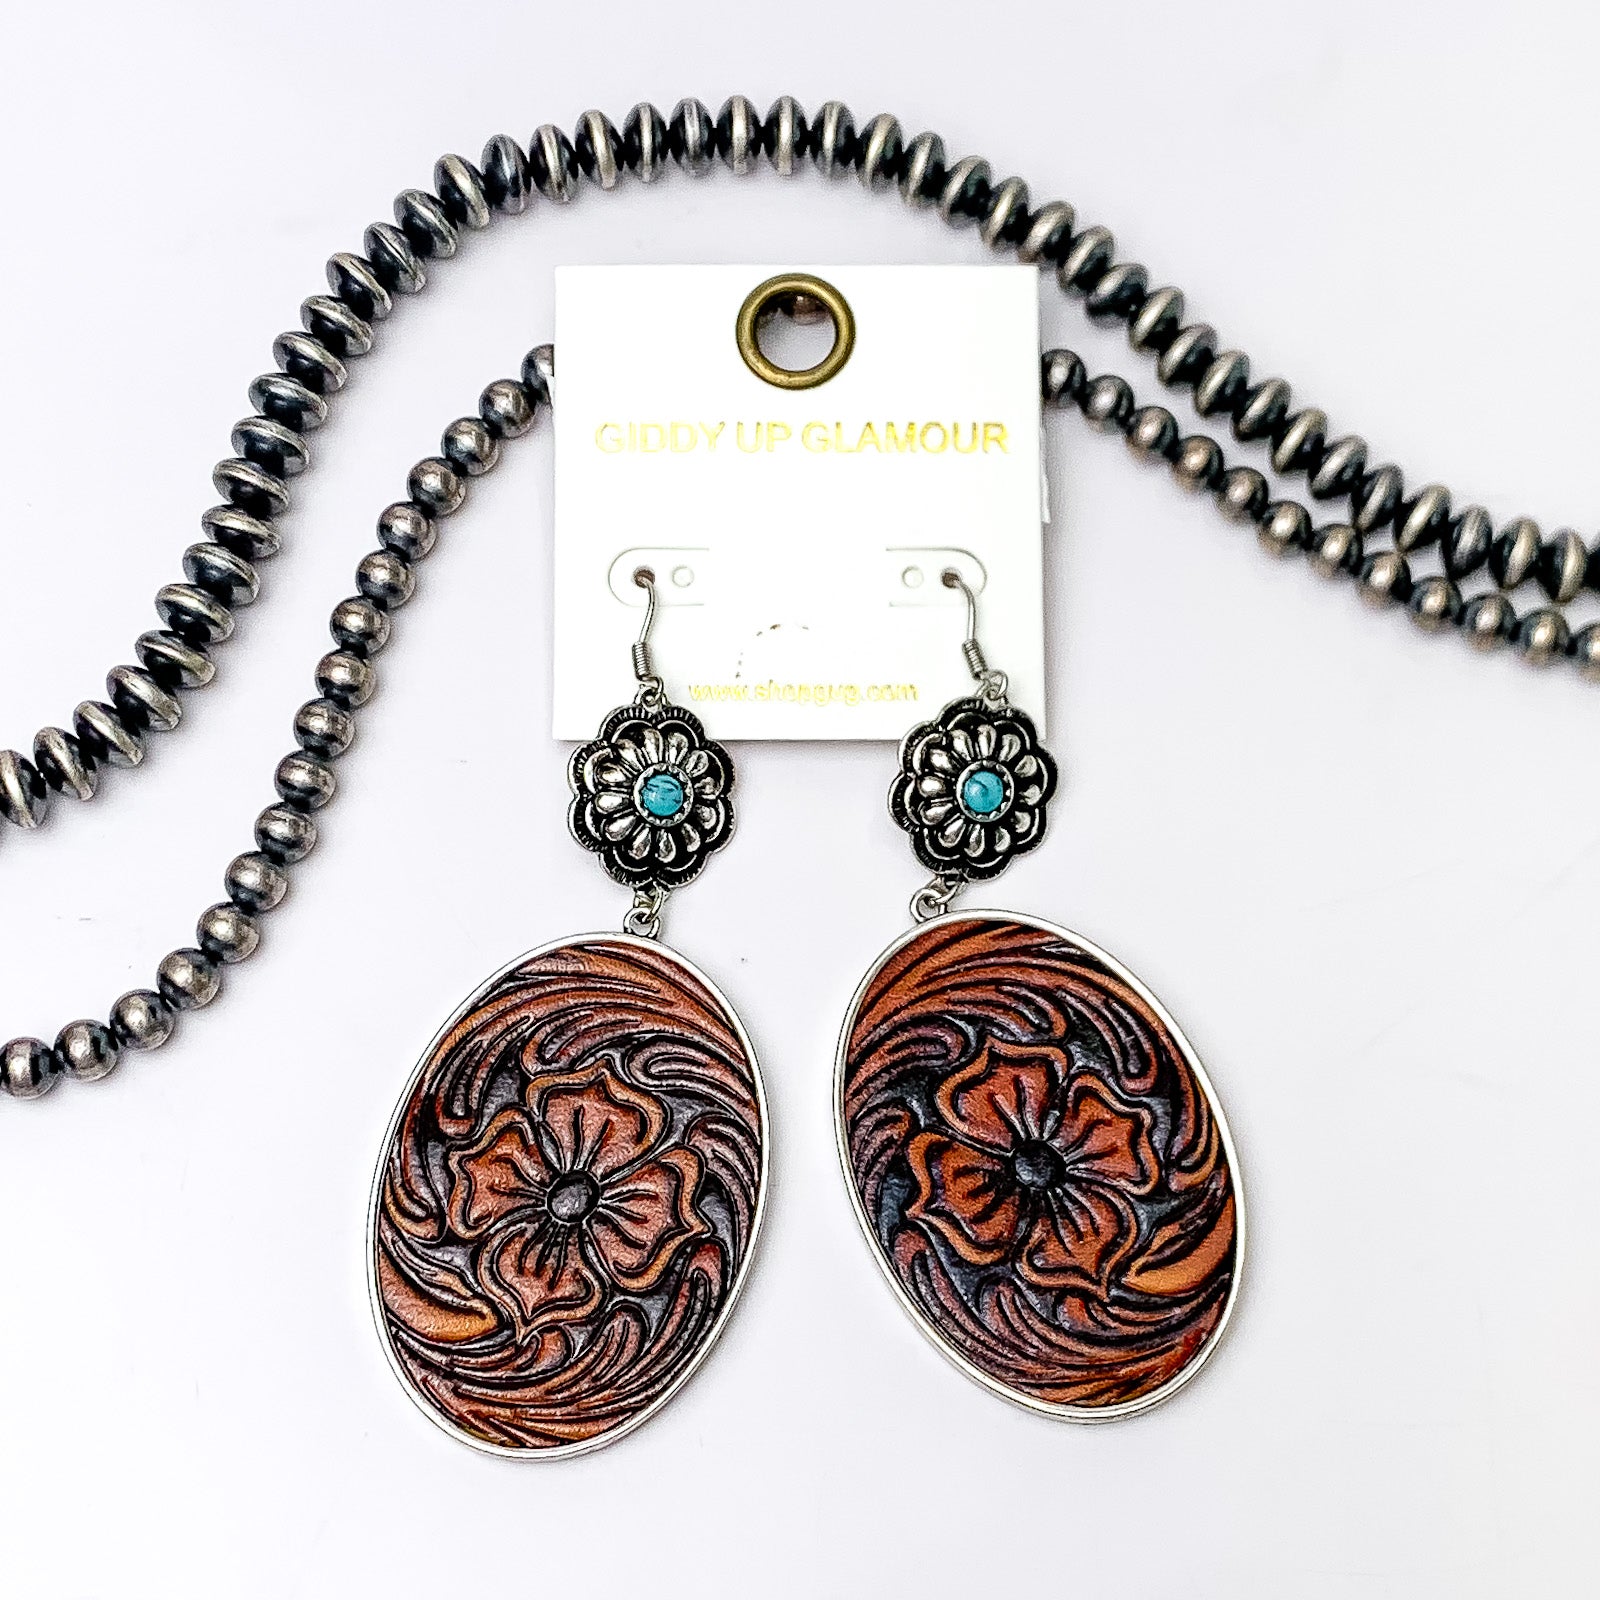 Silver concho dangle earrings with oval pendant. These earrings have a faux leather tooled print. These earrings are pictured on a white background with silver beads at the top of the picture. 